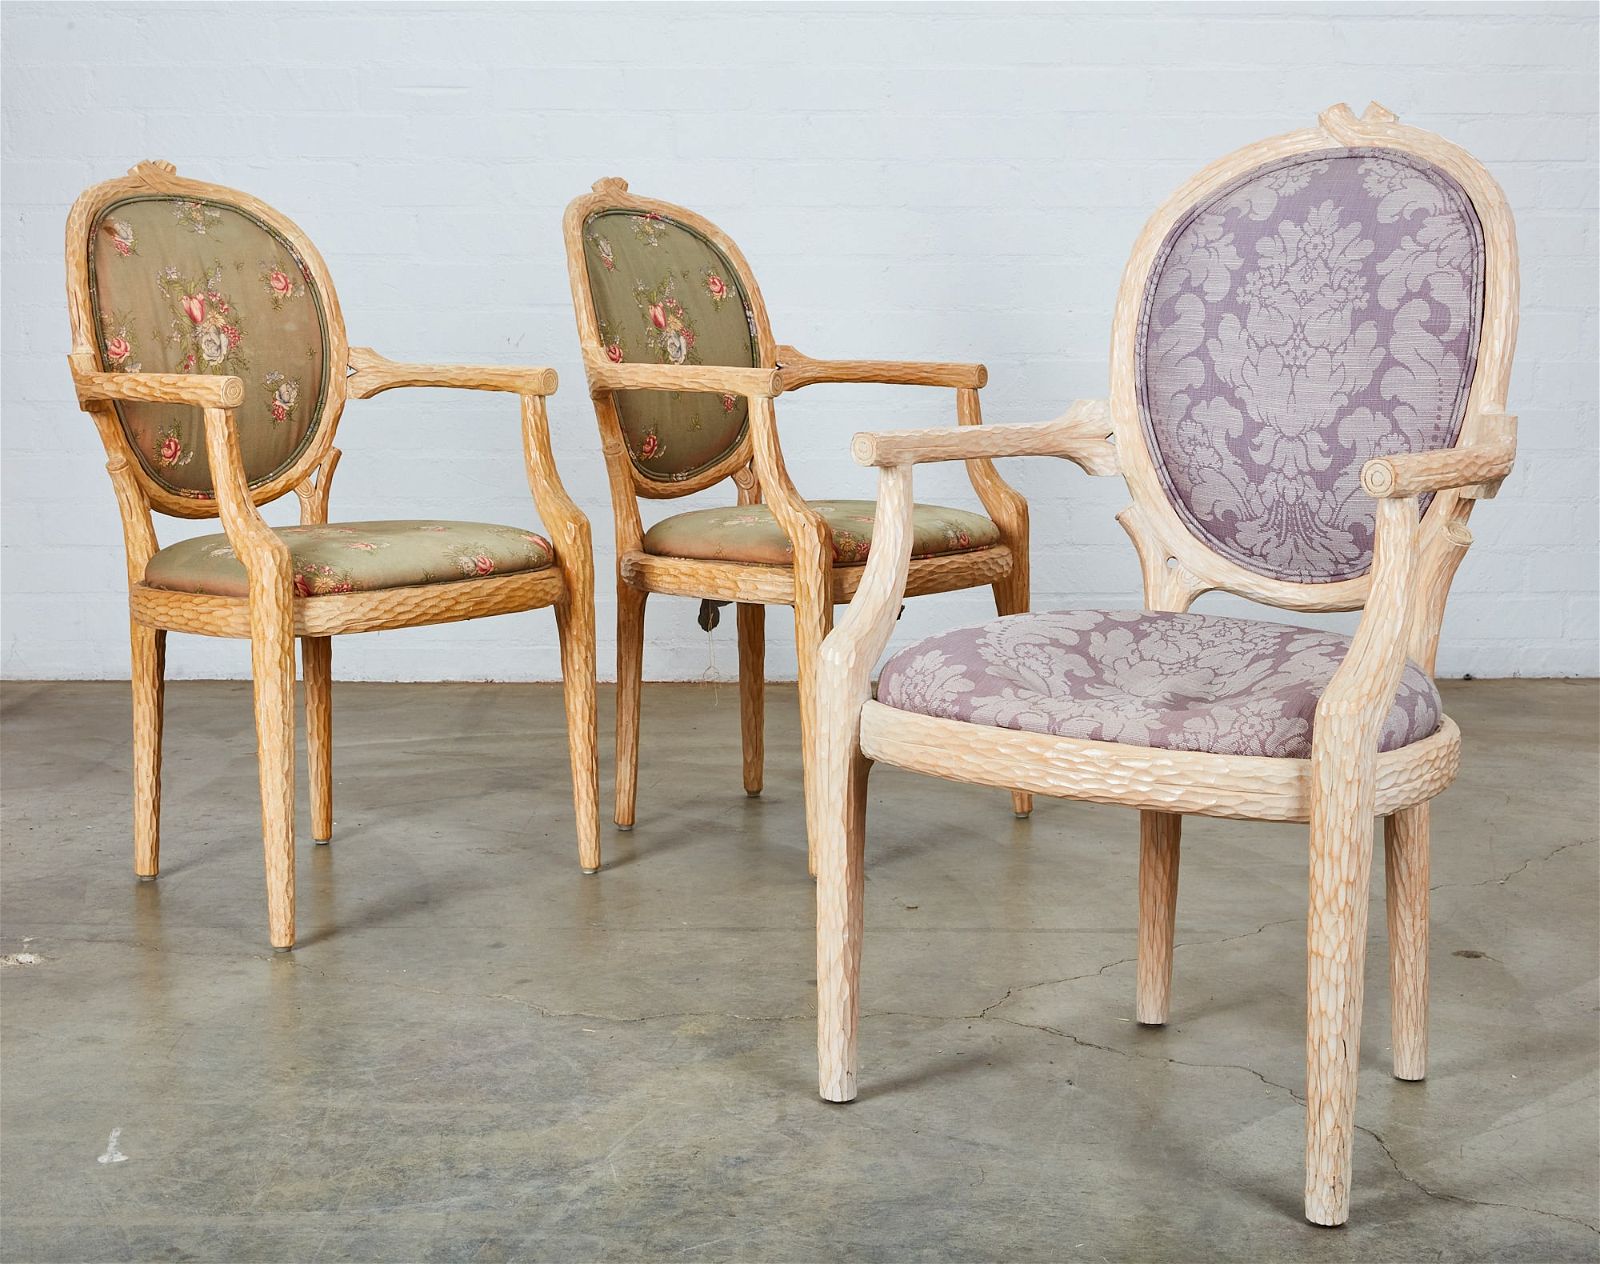 THREE PAINTED BRANCH FORM ARMCHAIRSThree 2fb33d5